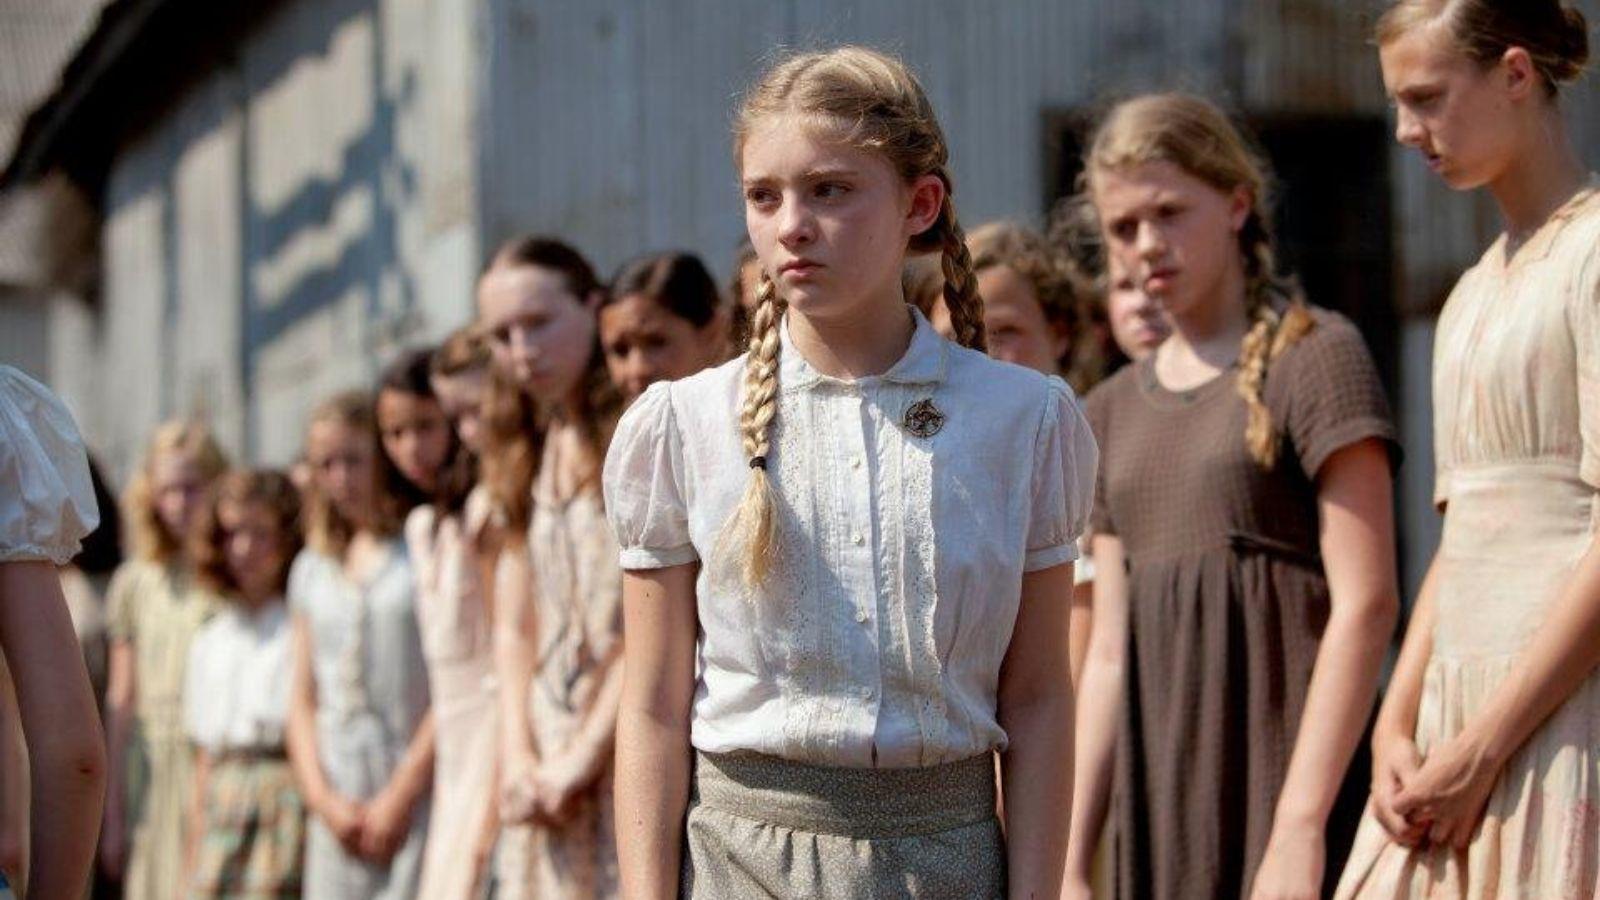 Willow Shields as Primrose Everdeen in The Hunger Games. She walks through the crowd of children during the reaping.